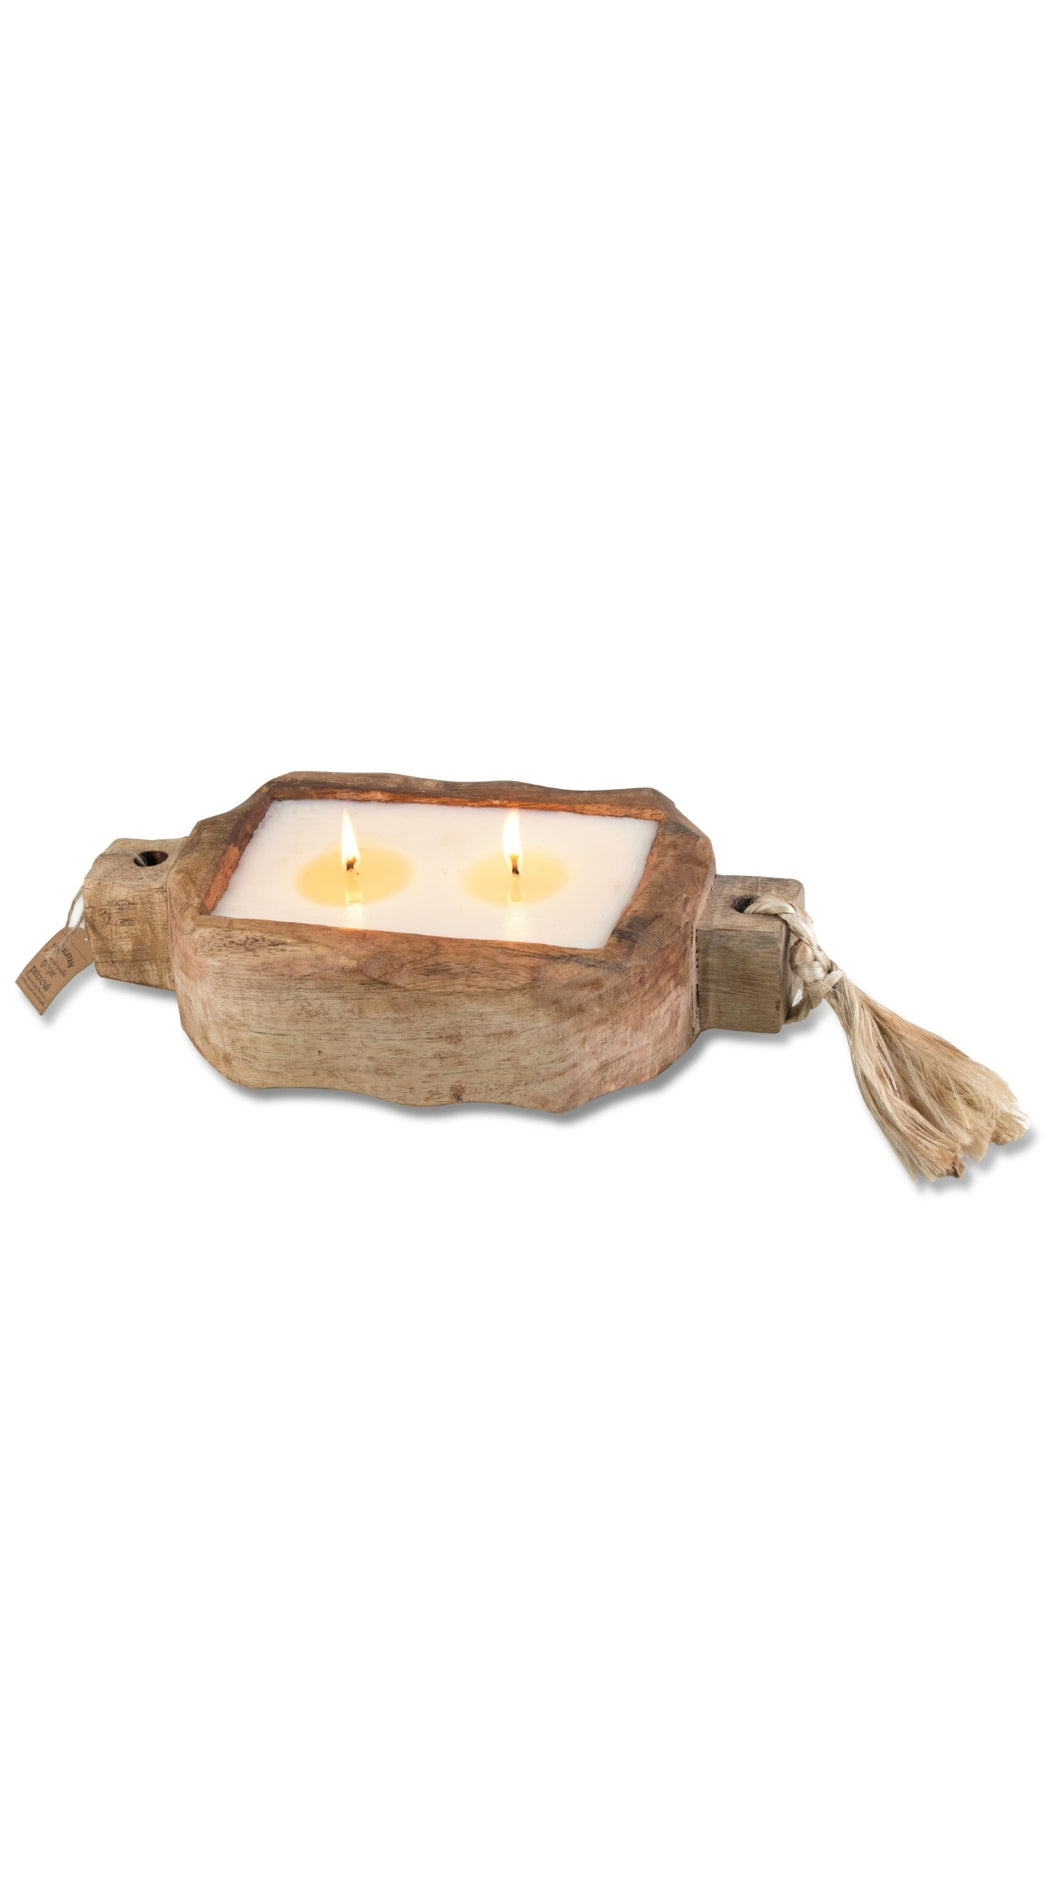 Small Driftwood Tray Candle - Grapefruit Pine